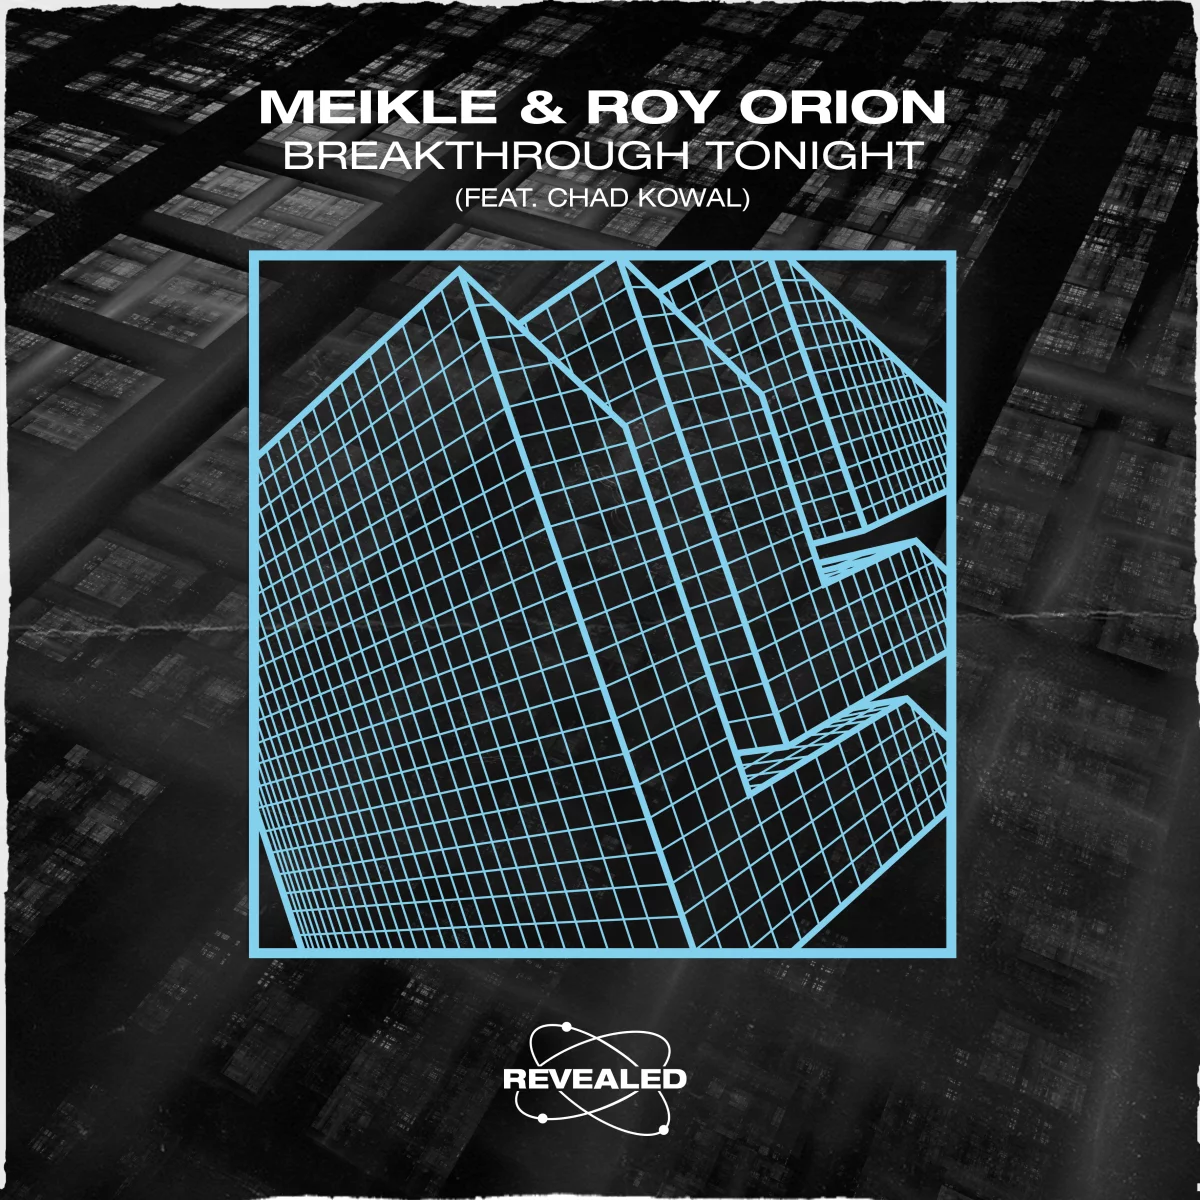 Breakthrough Tonight - Meikle⁠ & Roy Orion⁠ feat. Chad Kowal⁠